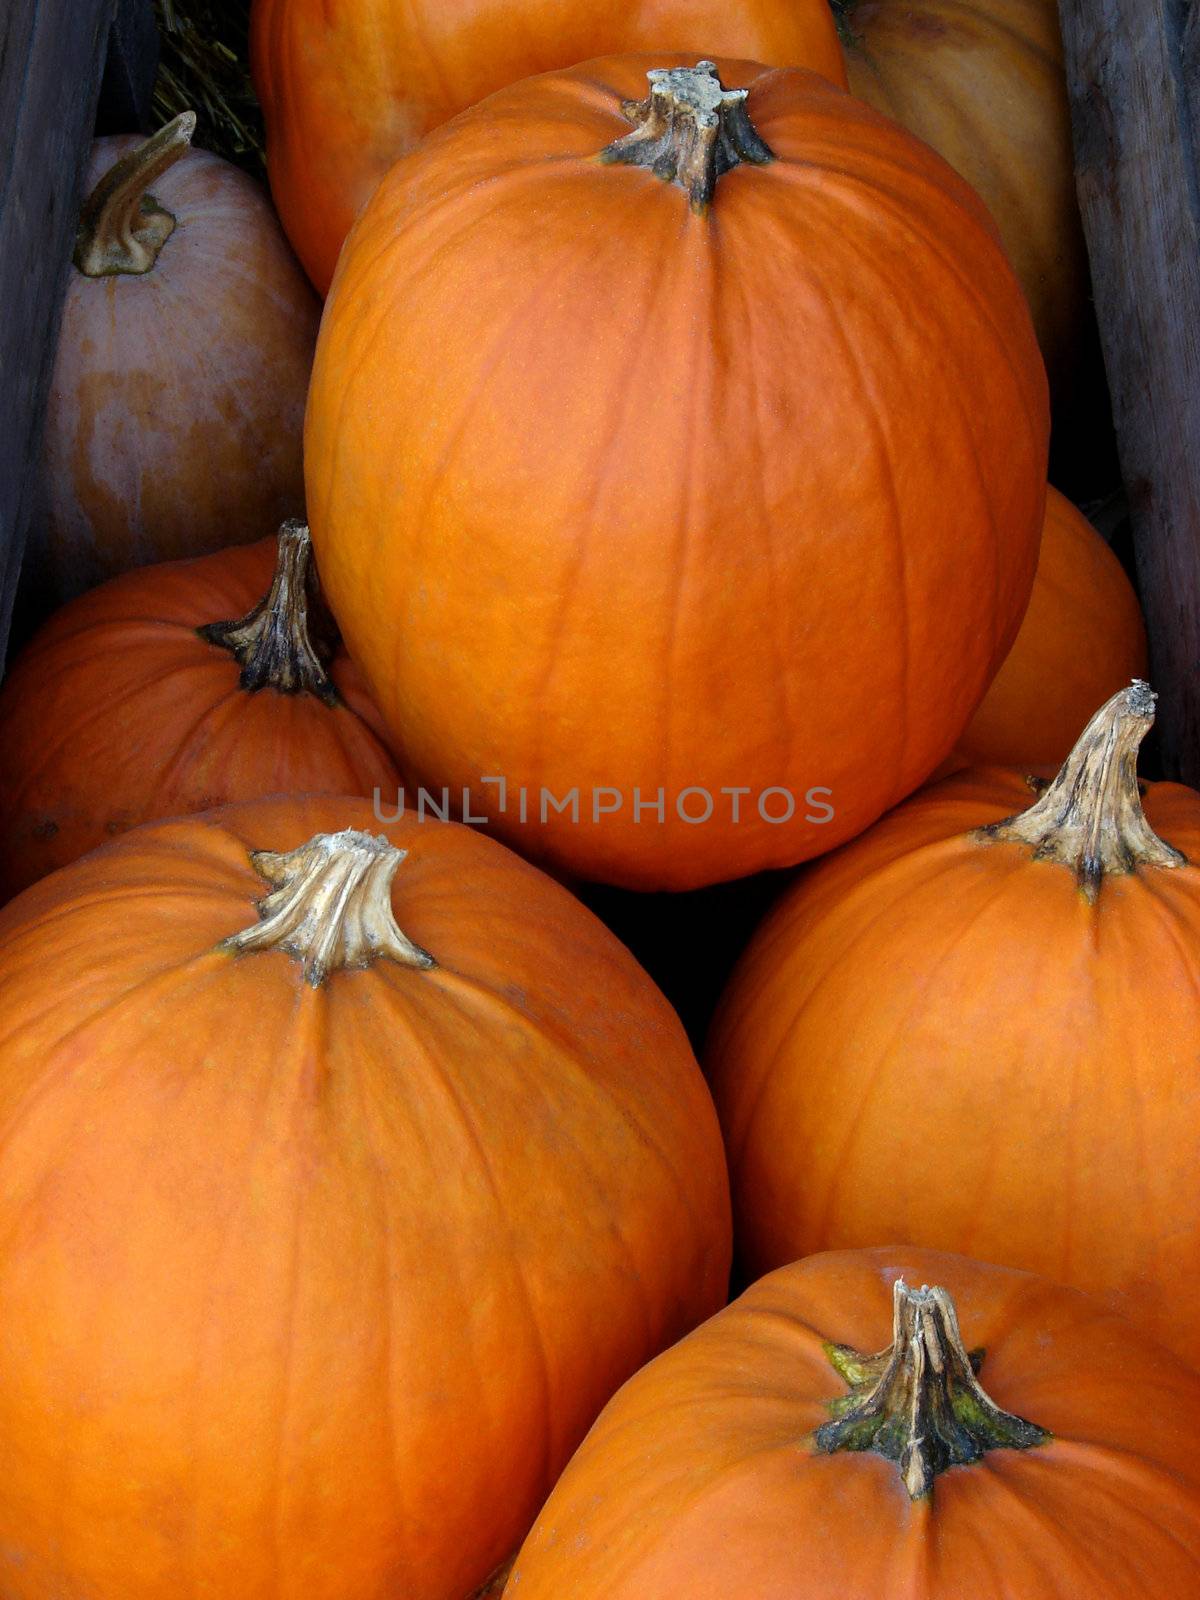 Pumpkins in a box by Thorvis